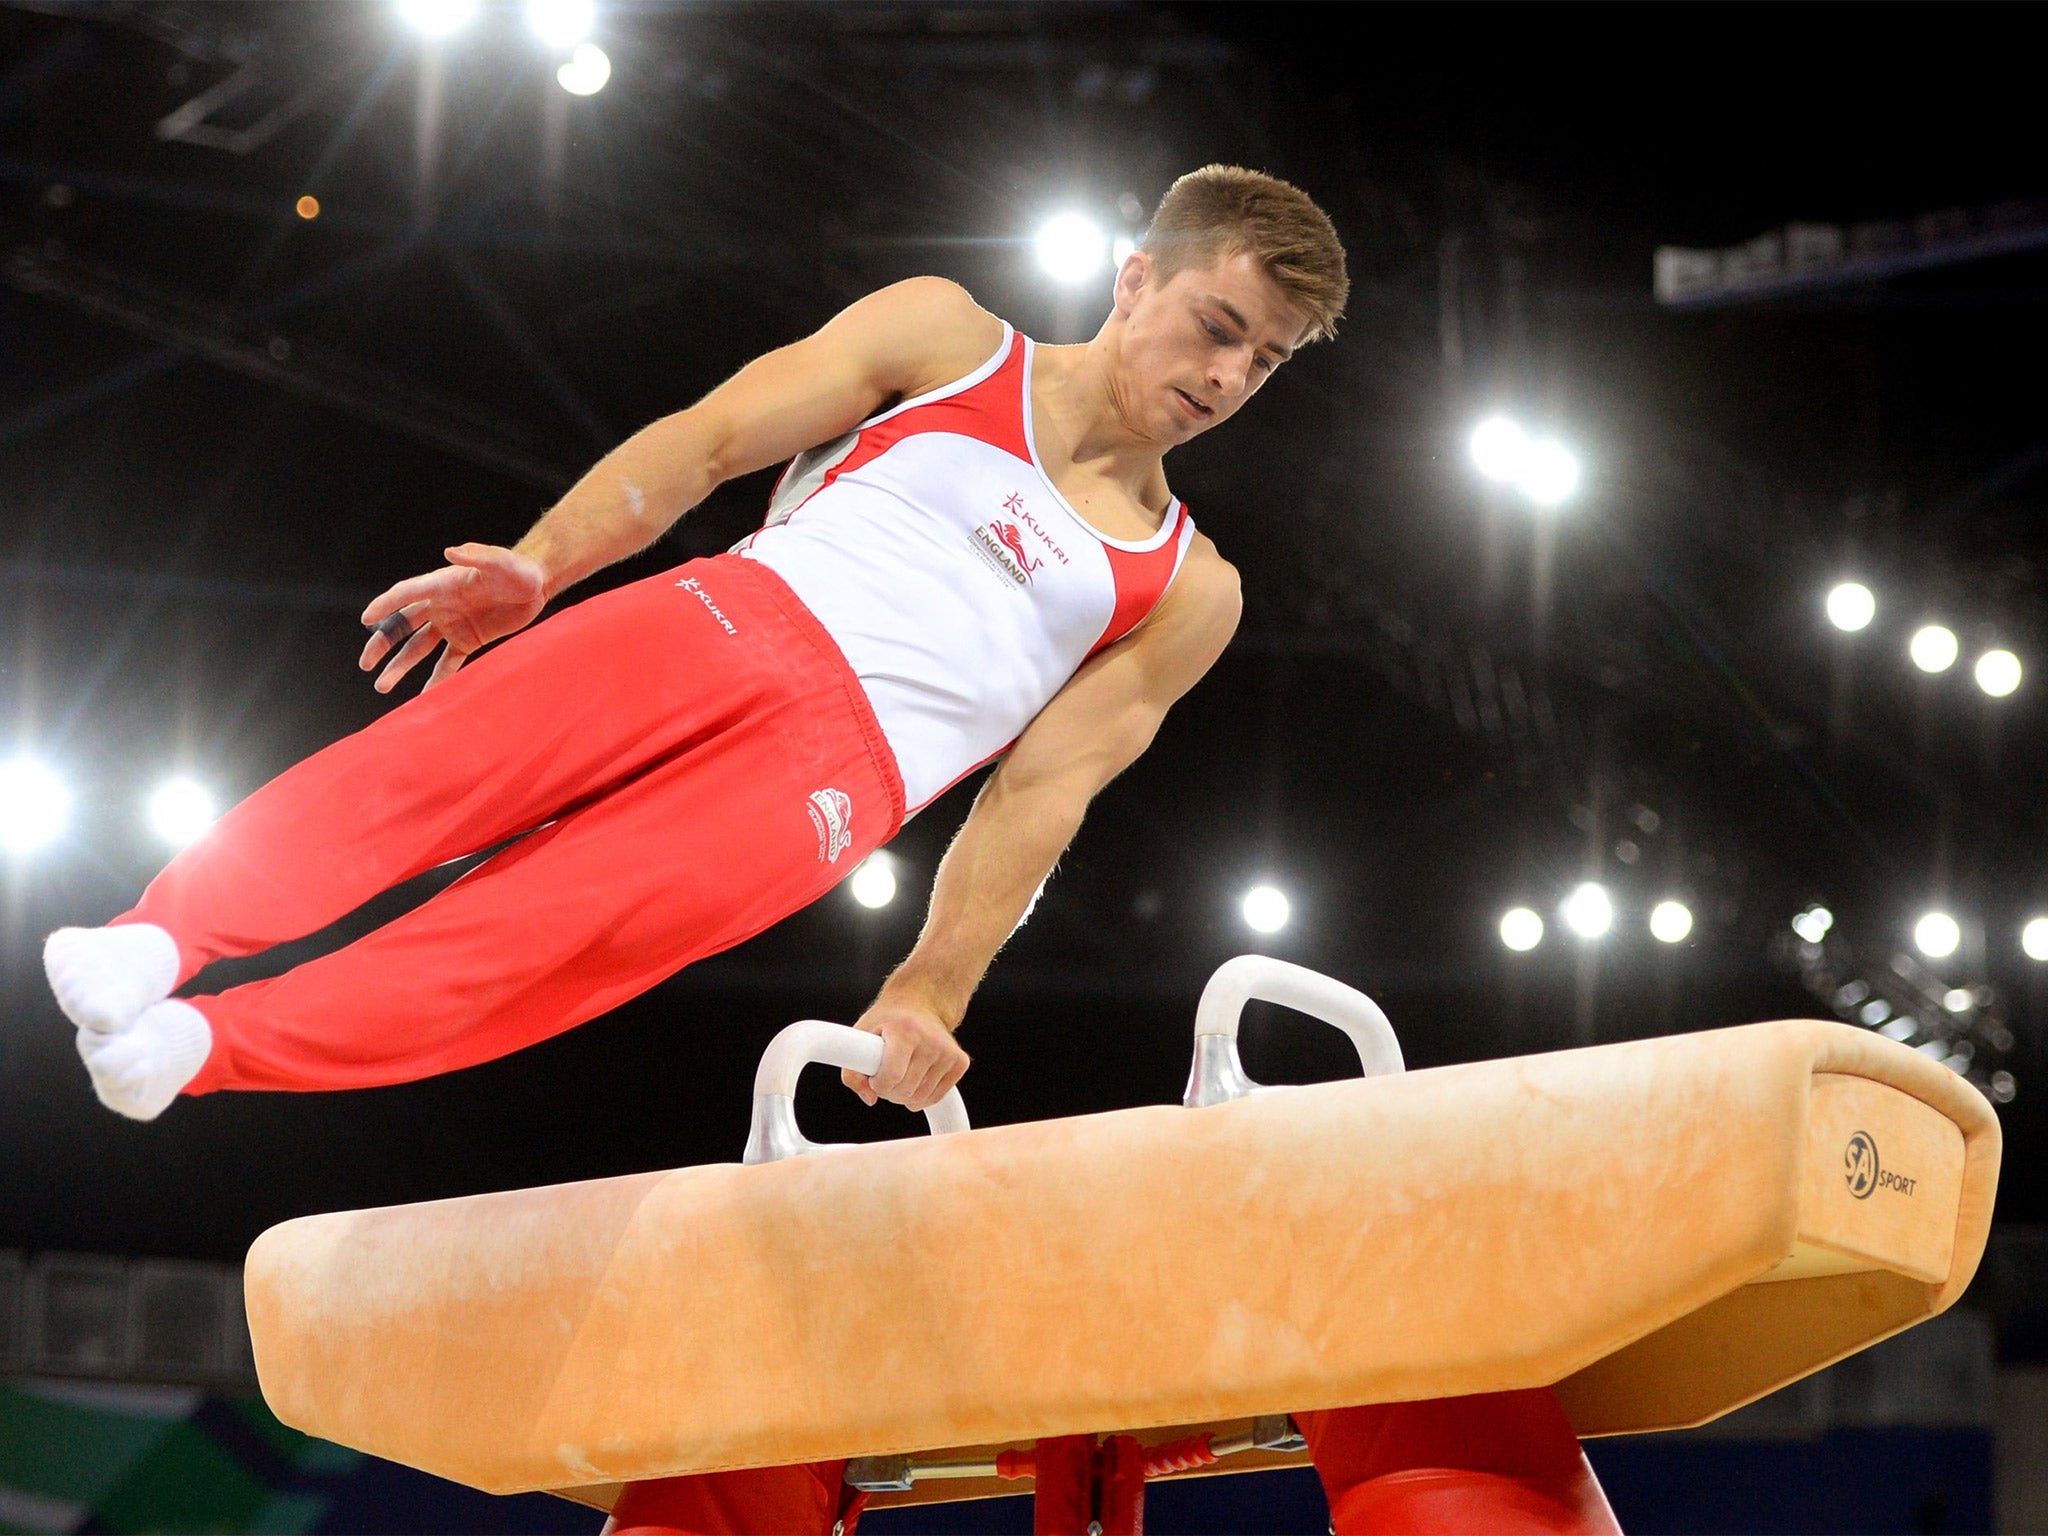 Max Whitlock competes on the pommel horse on his way to gold